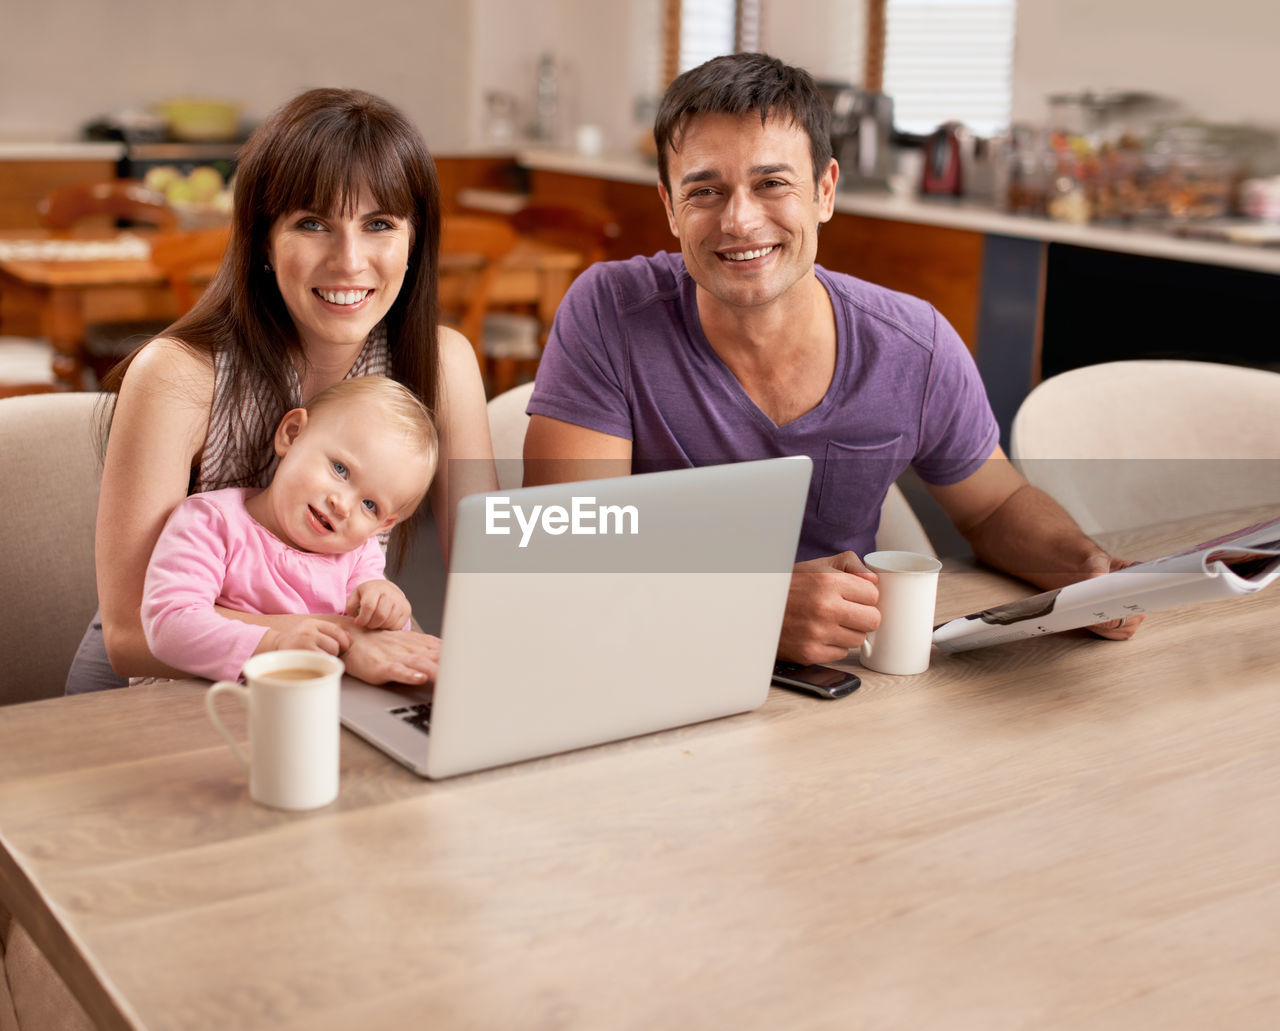 laptop, adult, wireless technology, technology, computer, female, women, using laptop, smiling, togetherness, family, happiness, indoors, communication, parent, men, domestic life, person, child, emotion, internet, two people, domestic room, lifestyles, home interior, table, computer network, sitting, bonding, positive emotion, cheerful, furniture, childhood, business, human face, casual clothing, clothing, father, food and drink, portrait, love, living room, one parent, cup, convenience, enjoyment, mature adult, portability, front view, working, mug, desk, conversation, room, drink, young adult, looking, relaxation